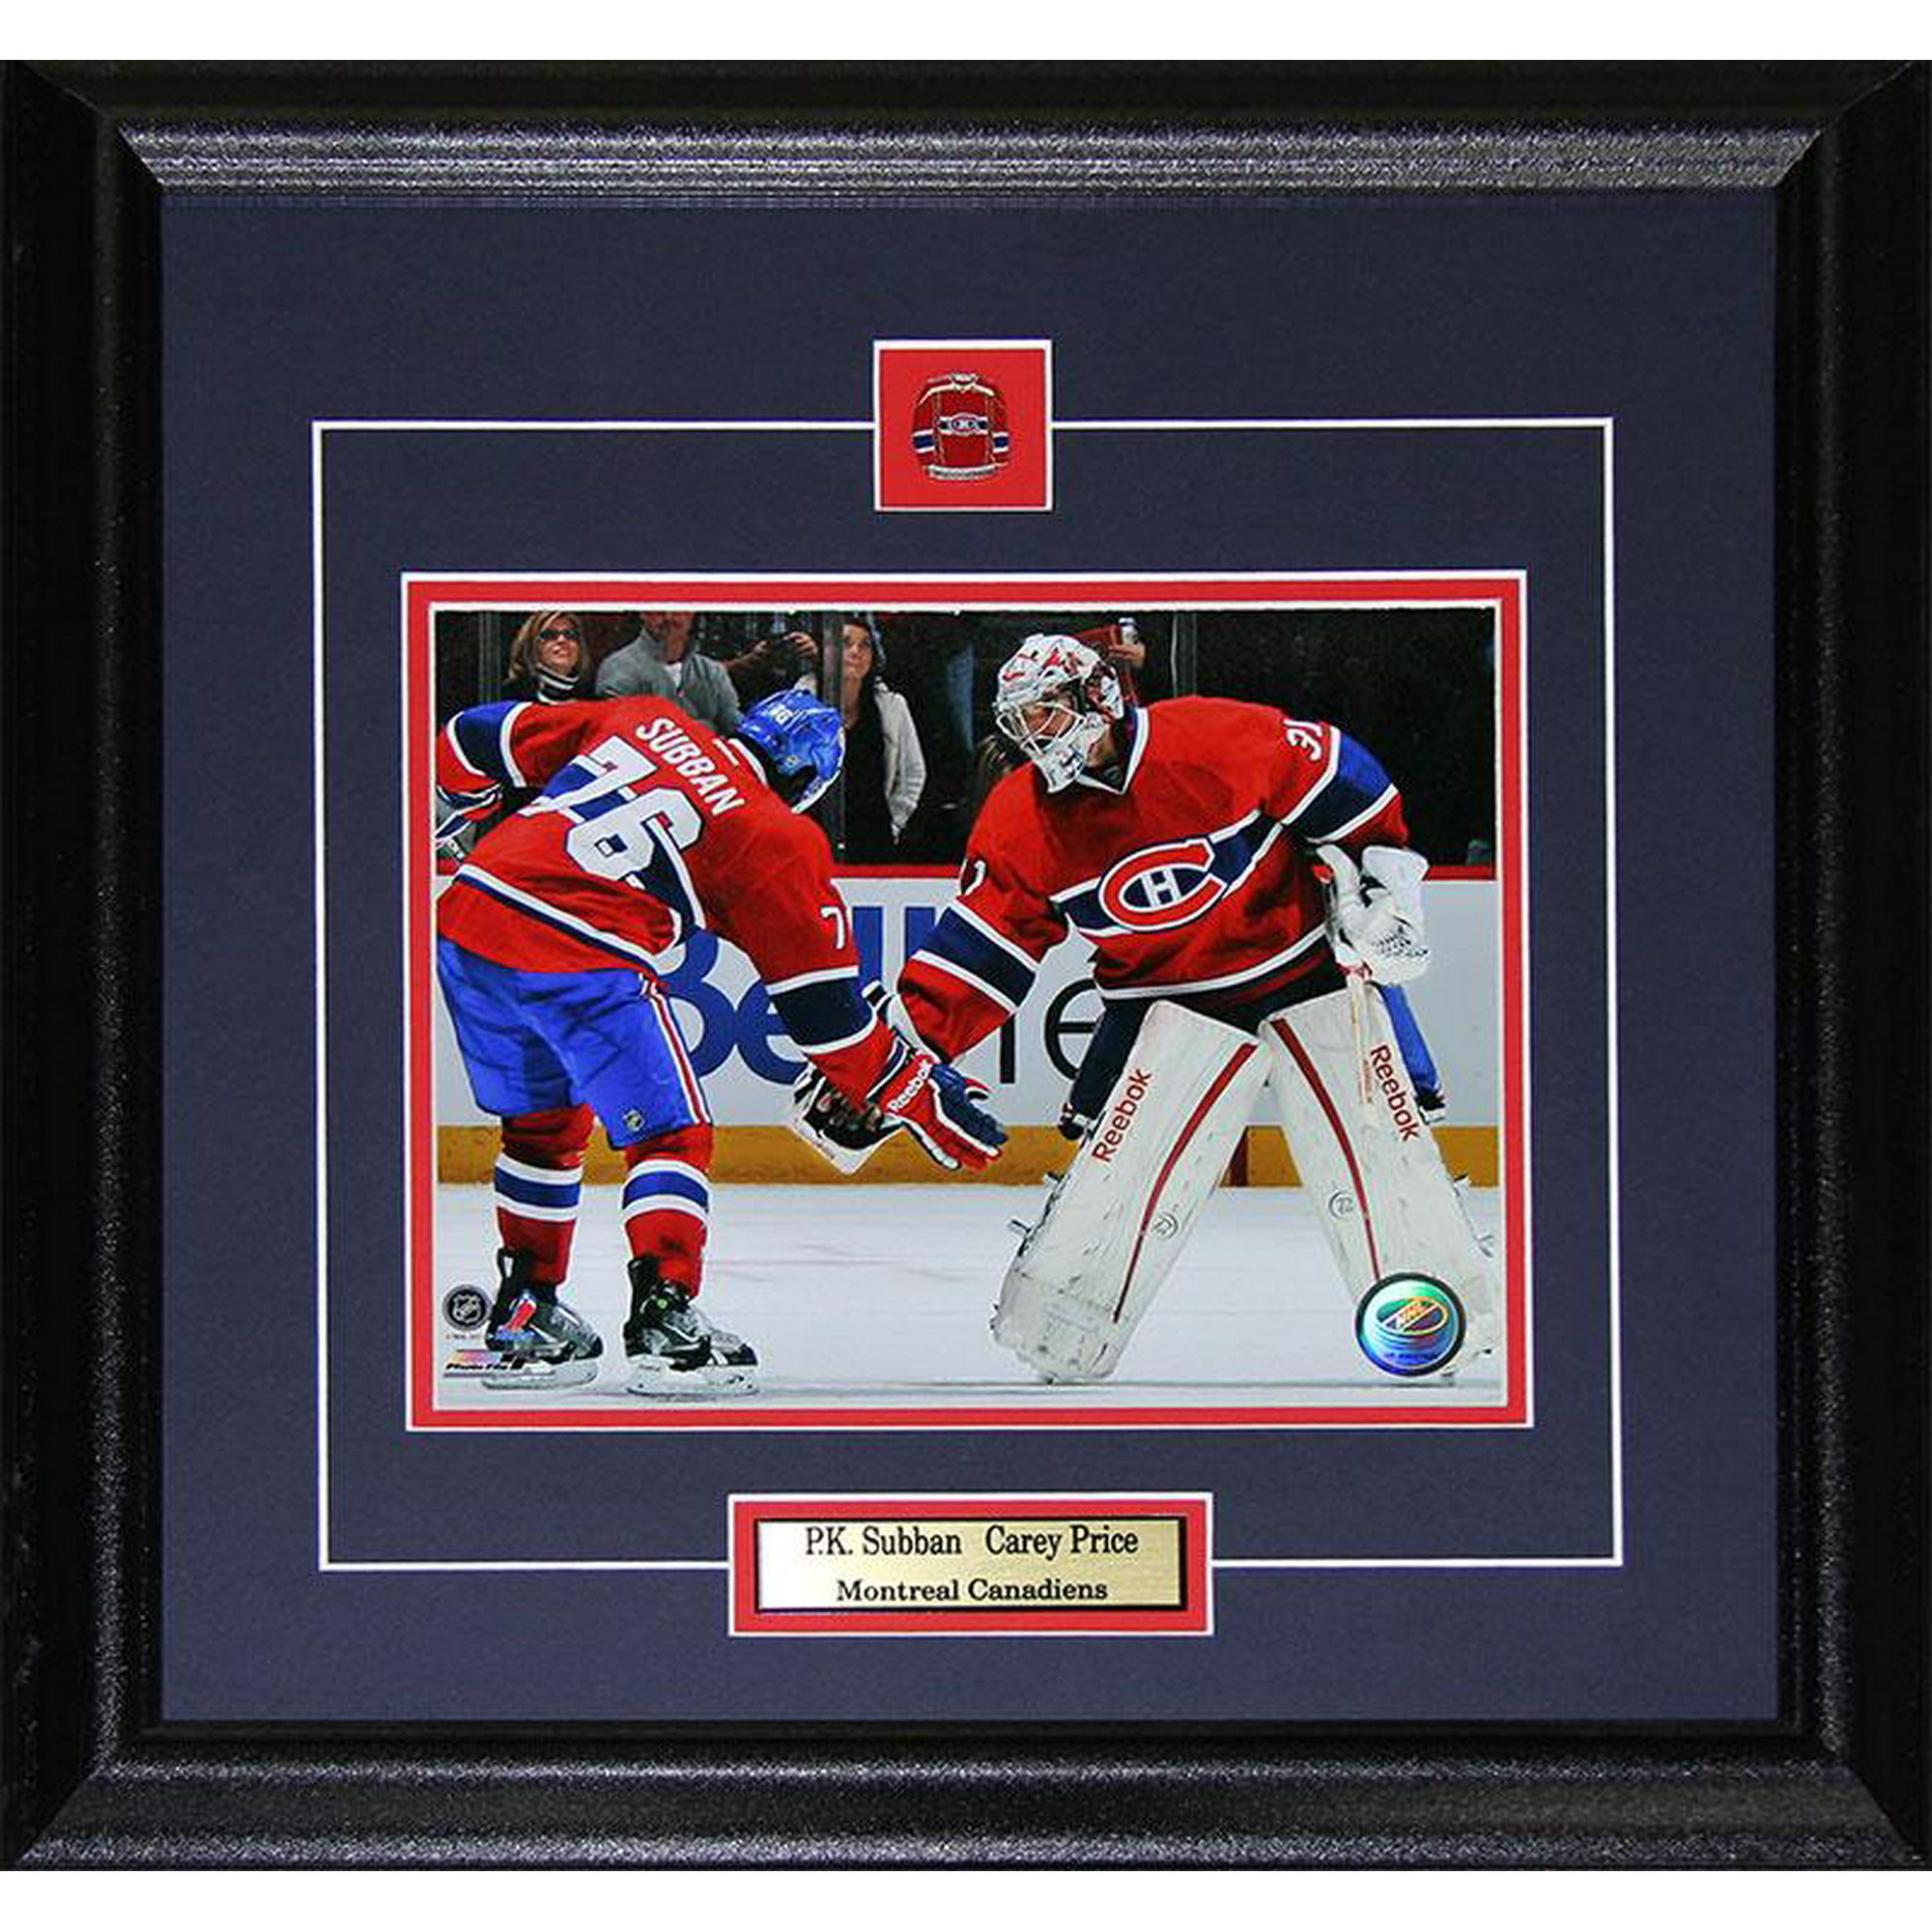 PK Subban Celebration Montreal Canadiens 8 x 10 Framed Hockey Photo with  Engraved Autograph - Dynasty Sports & Framing